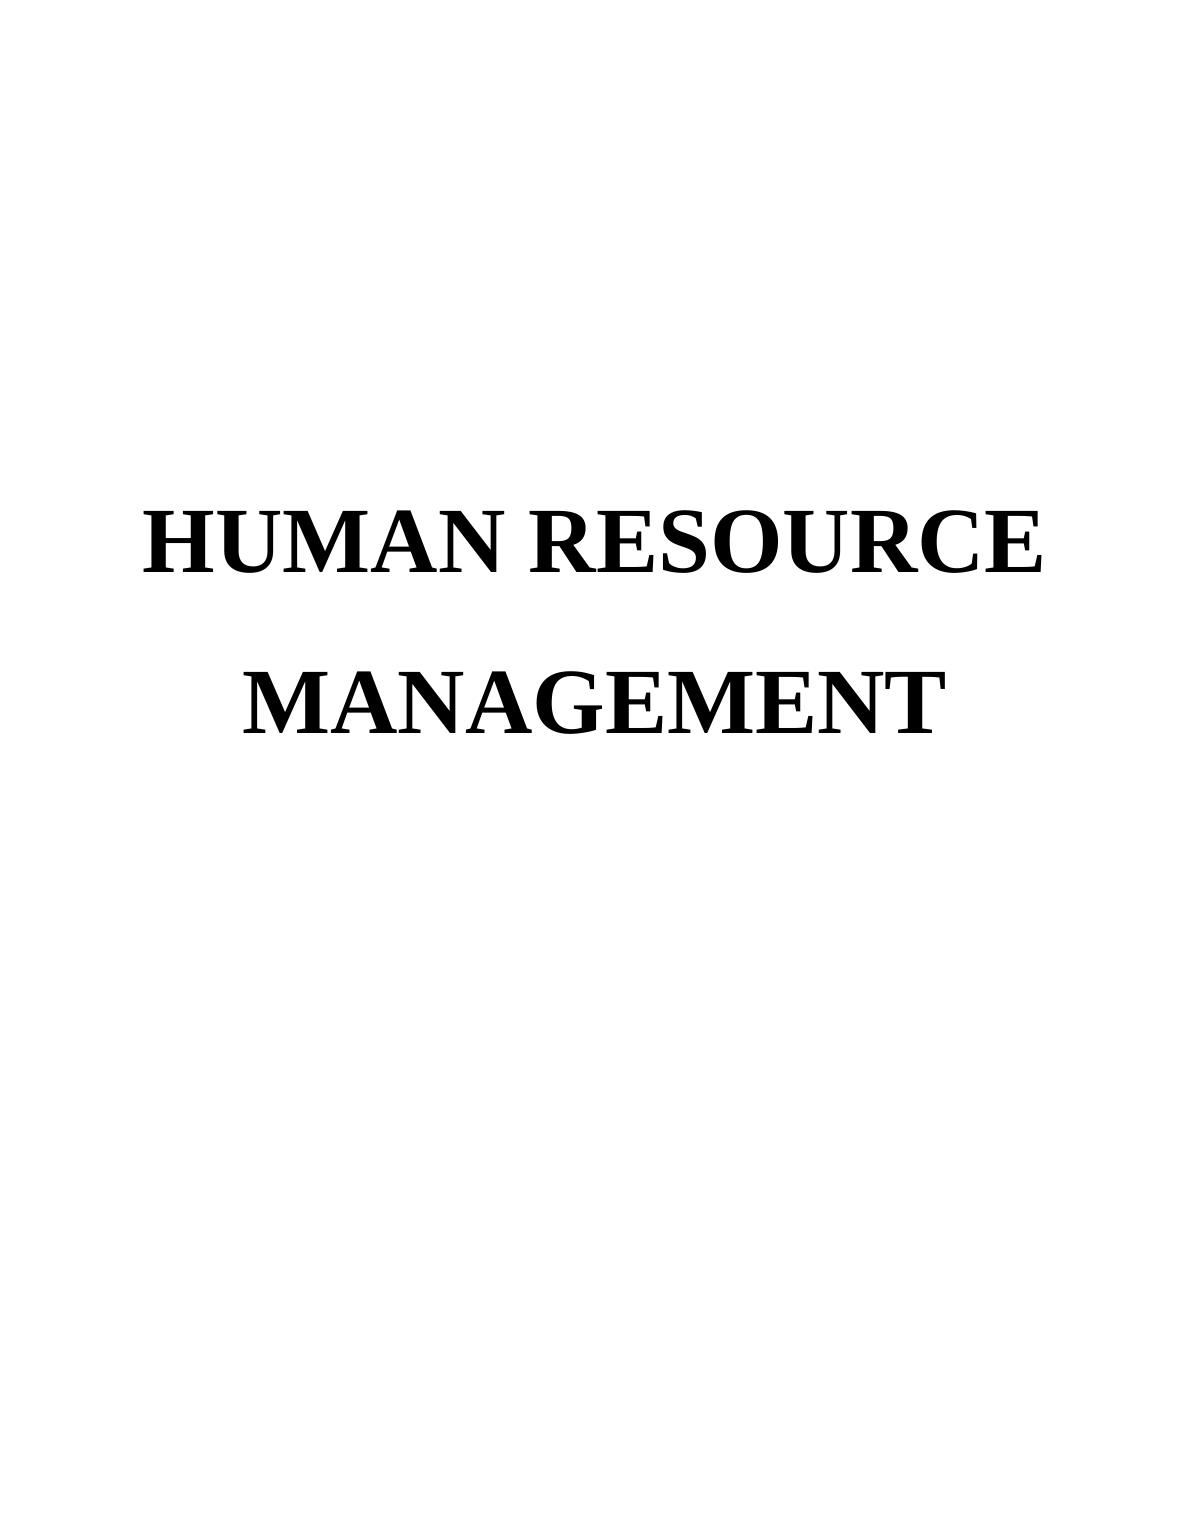 Assessment of HRM Practices in Human Resource Management_1